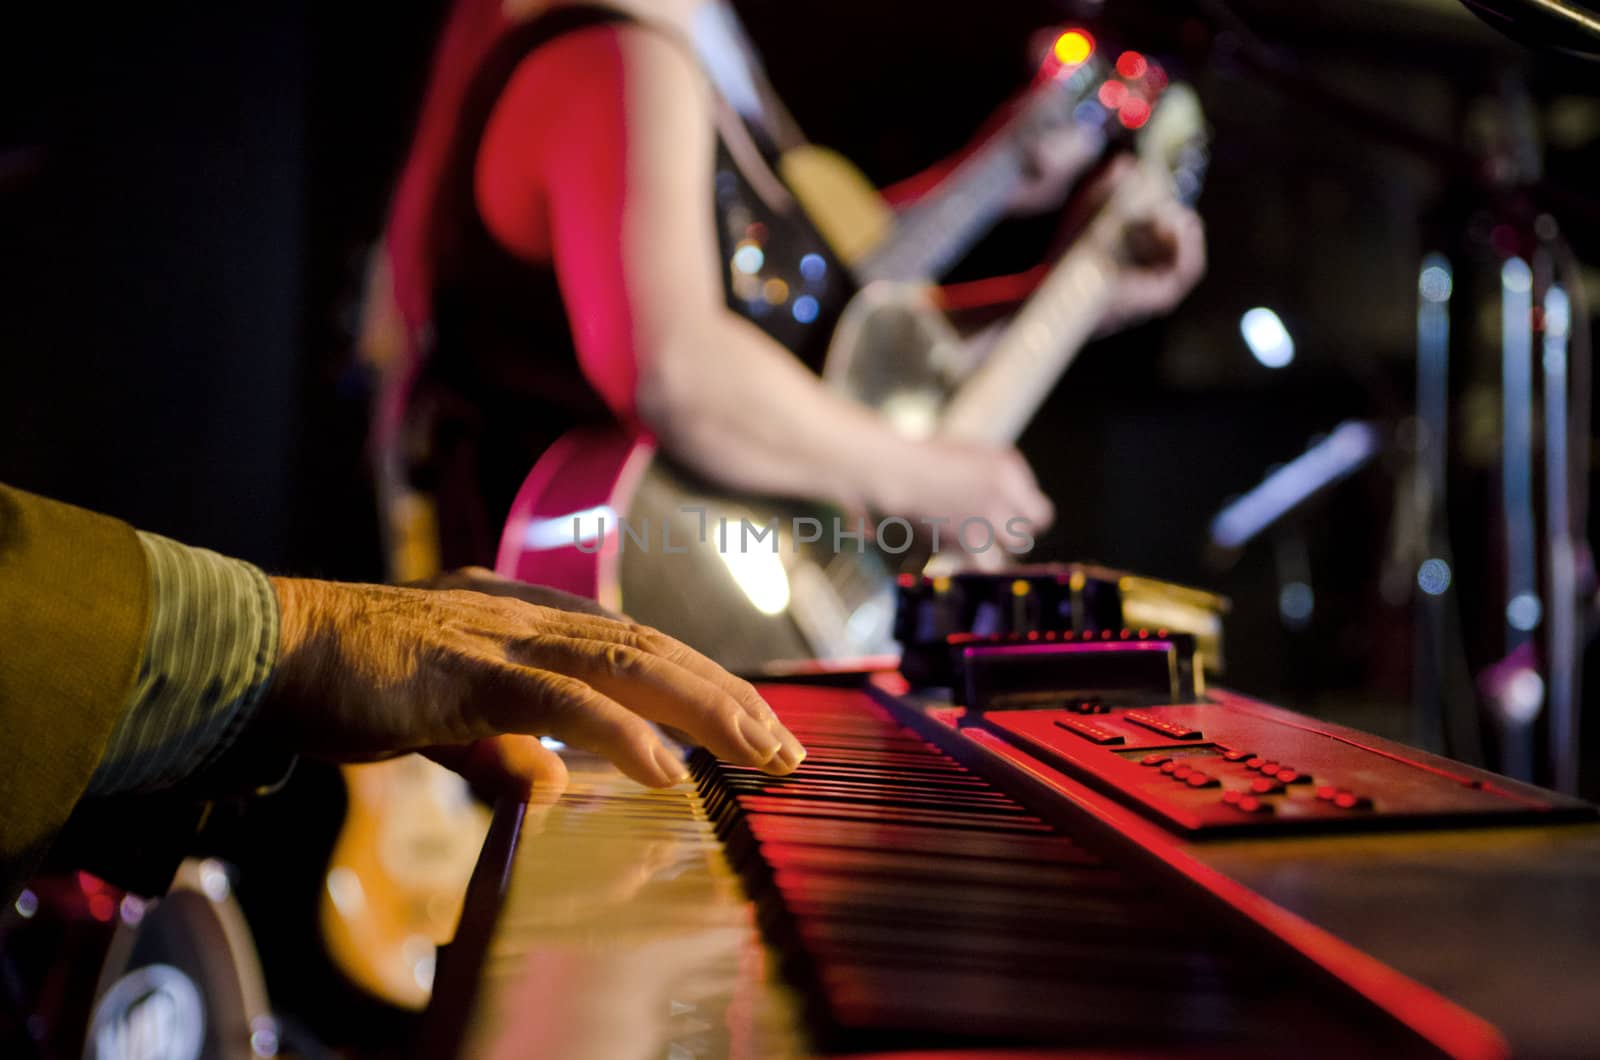 Selective focus on the hands on the keyboard at a blues festival with guitar players in the background